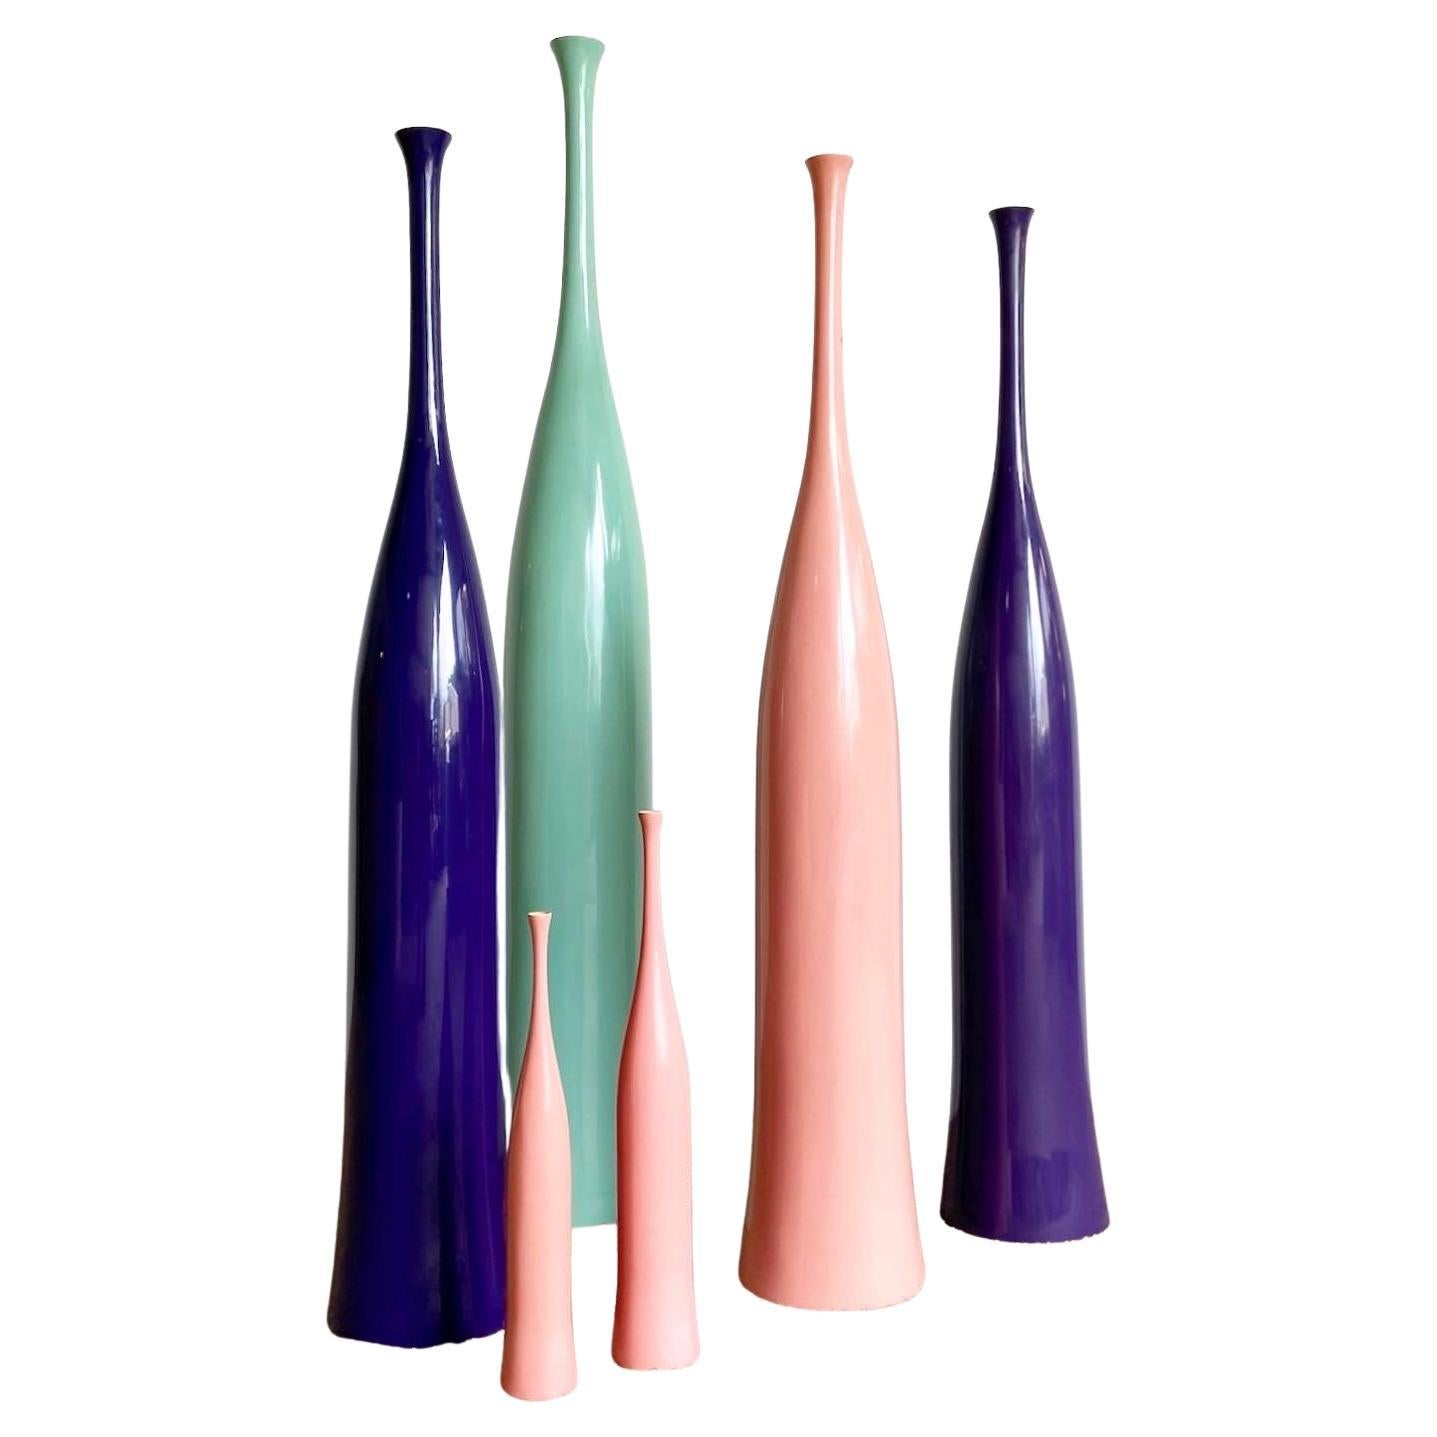 Postmodern Vases by Oggetti in Pink, Purple, and Teal - 6 Pieces For Sale